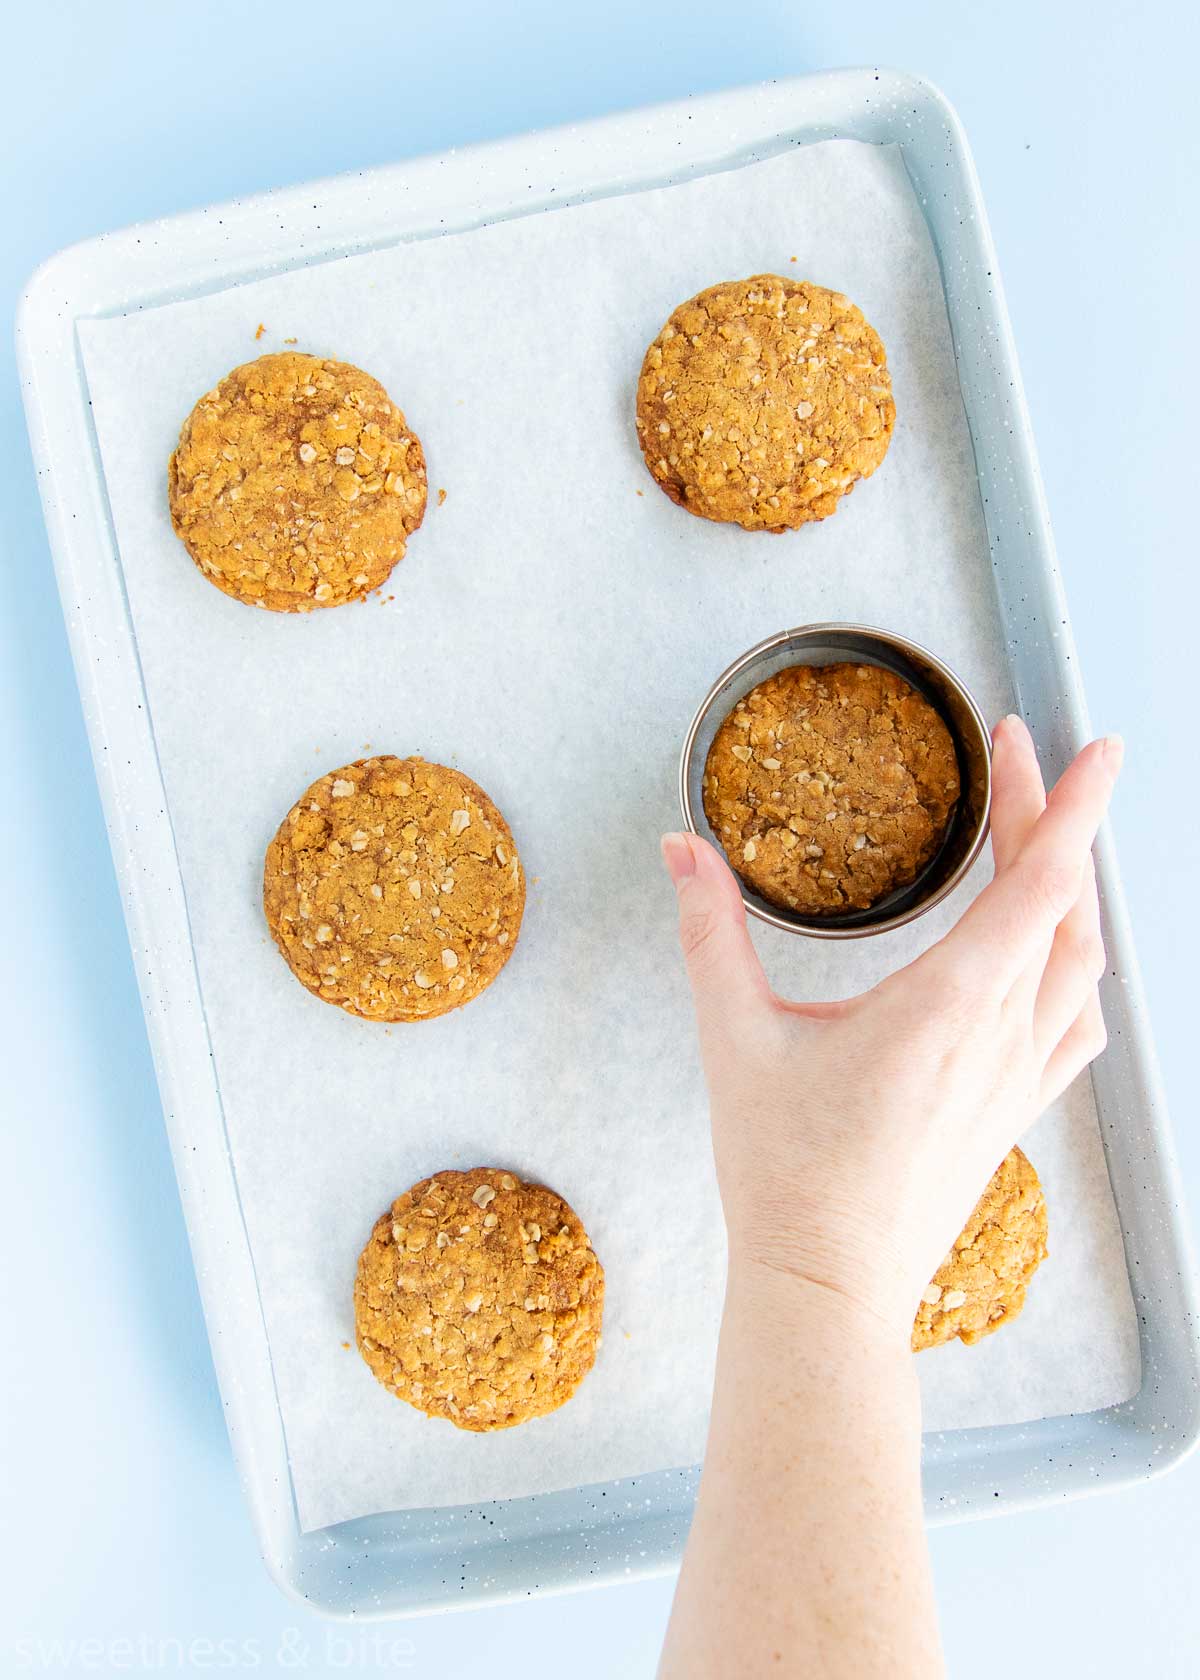 Six baked Anzac biscuits on a tray, with a round cookie cutter being used to make the biscuits more round.